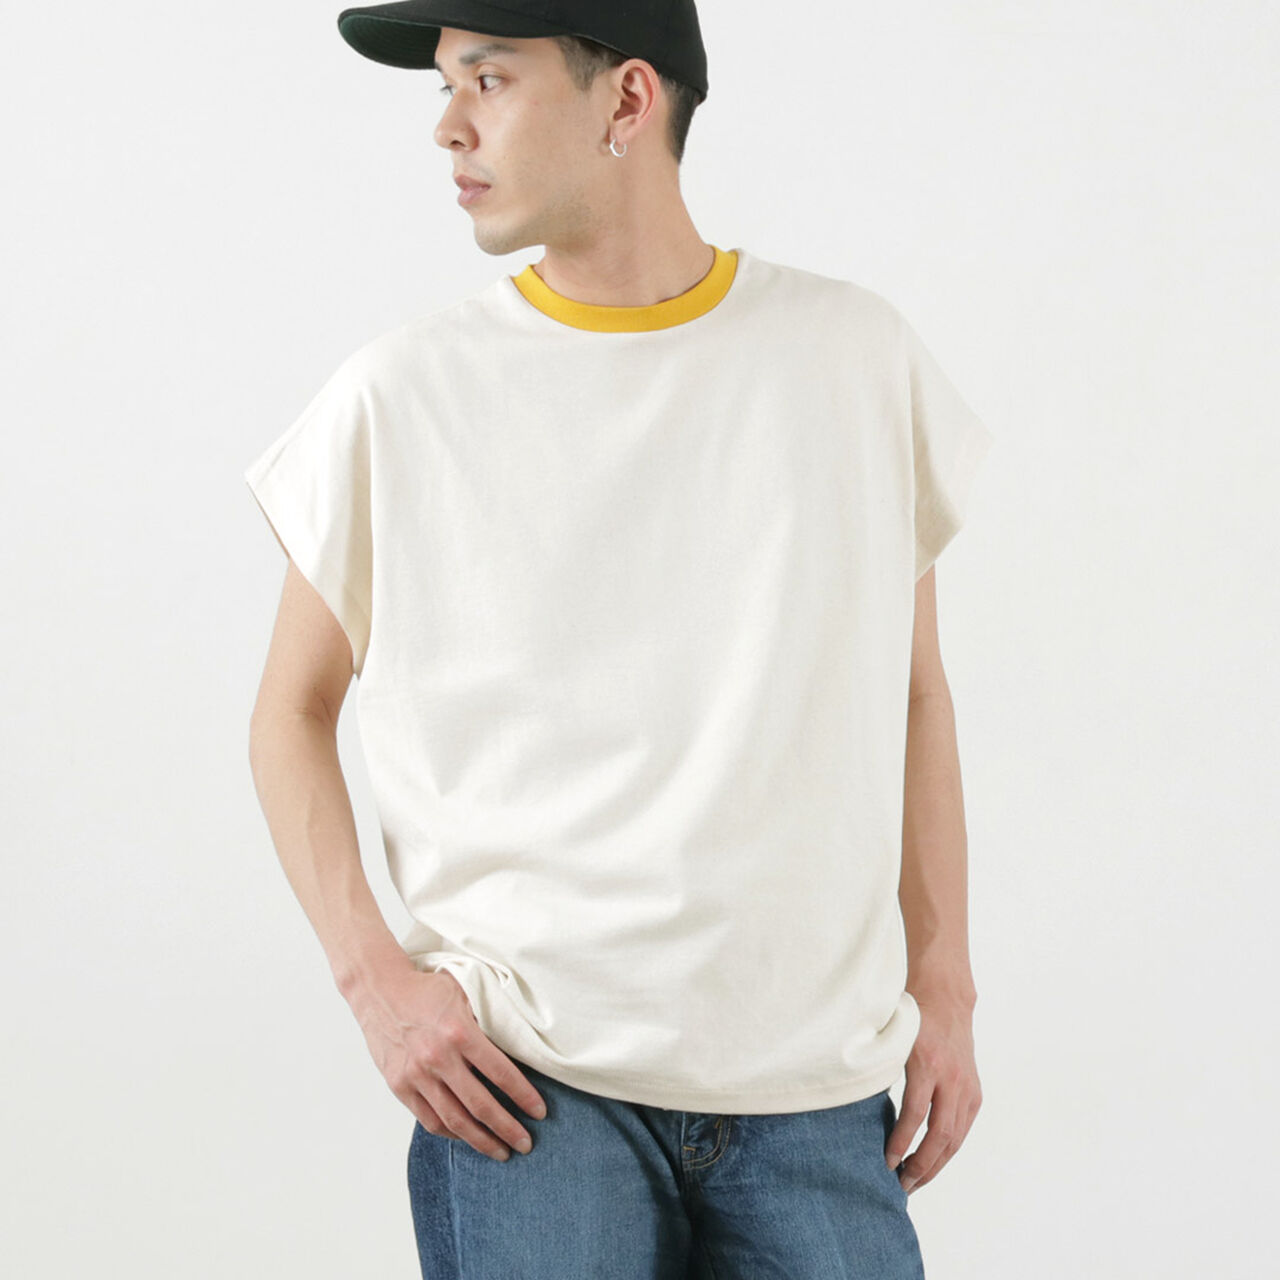 Open Ended French Sleeve T-Shirt Solid,Kinari, large image number 0